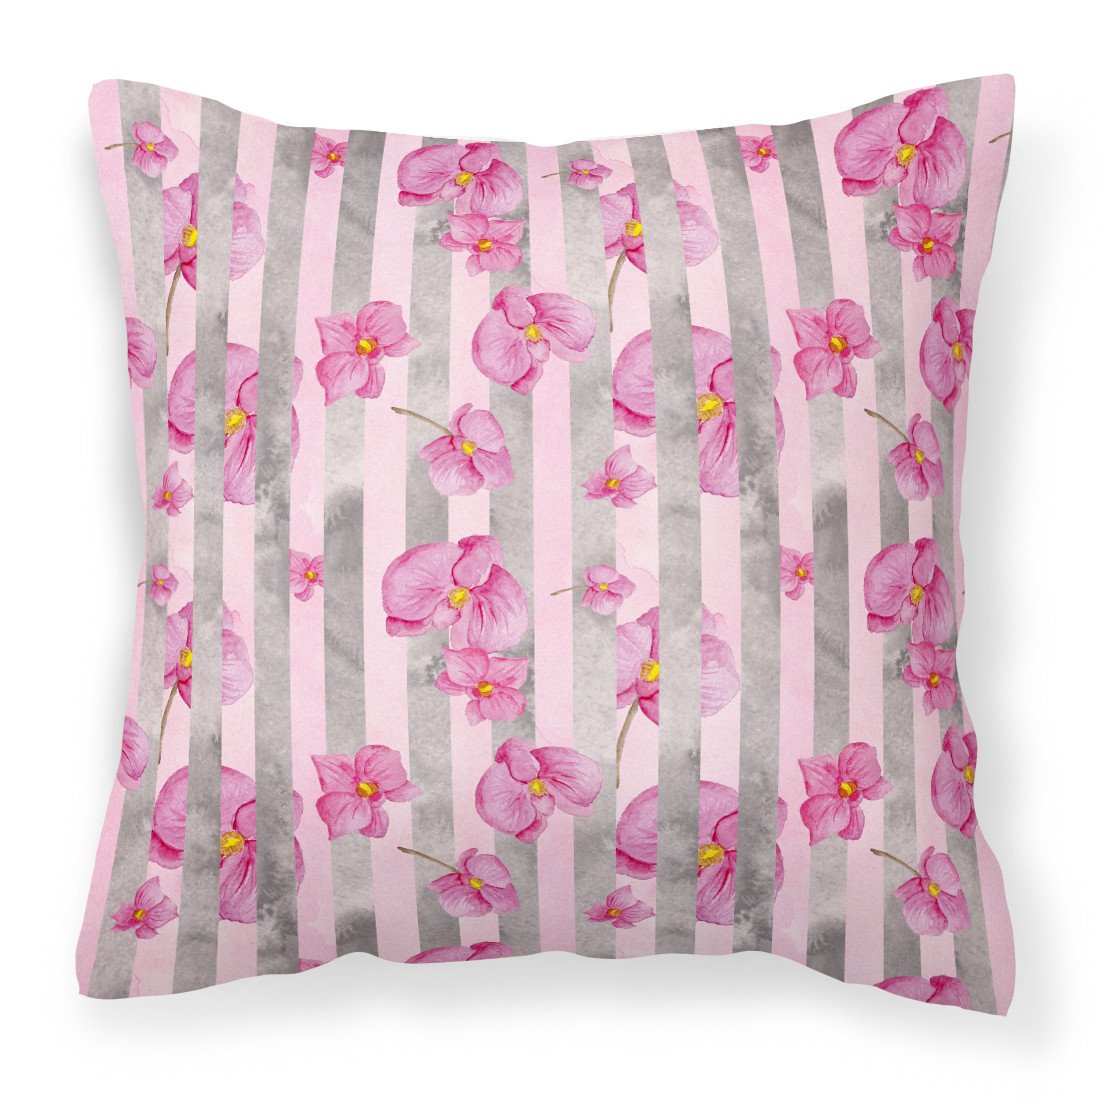 Watercolor Pink Flowers Grey Stripes Fabric Decorative Pillow BB7502PW1818 by Caroline's Treasures